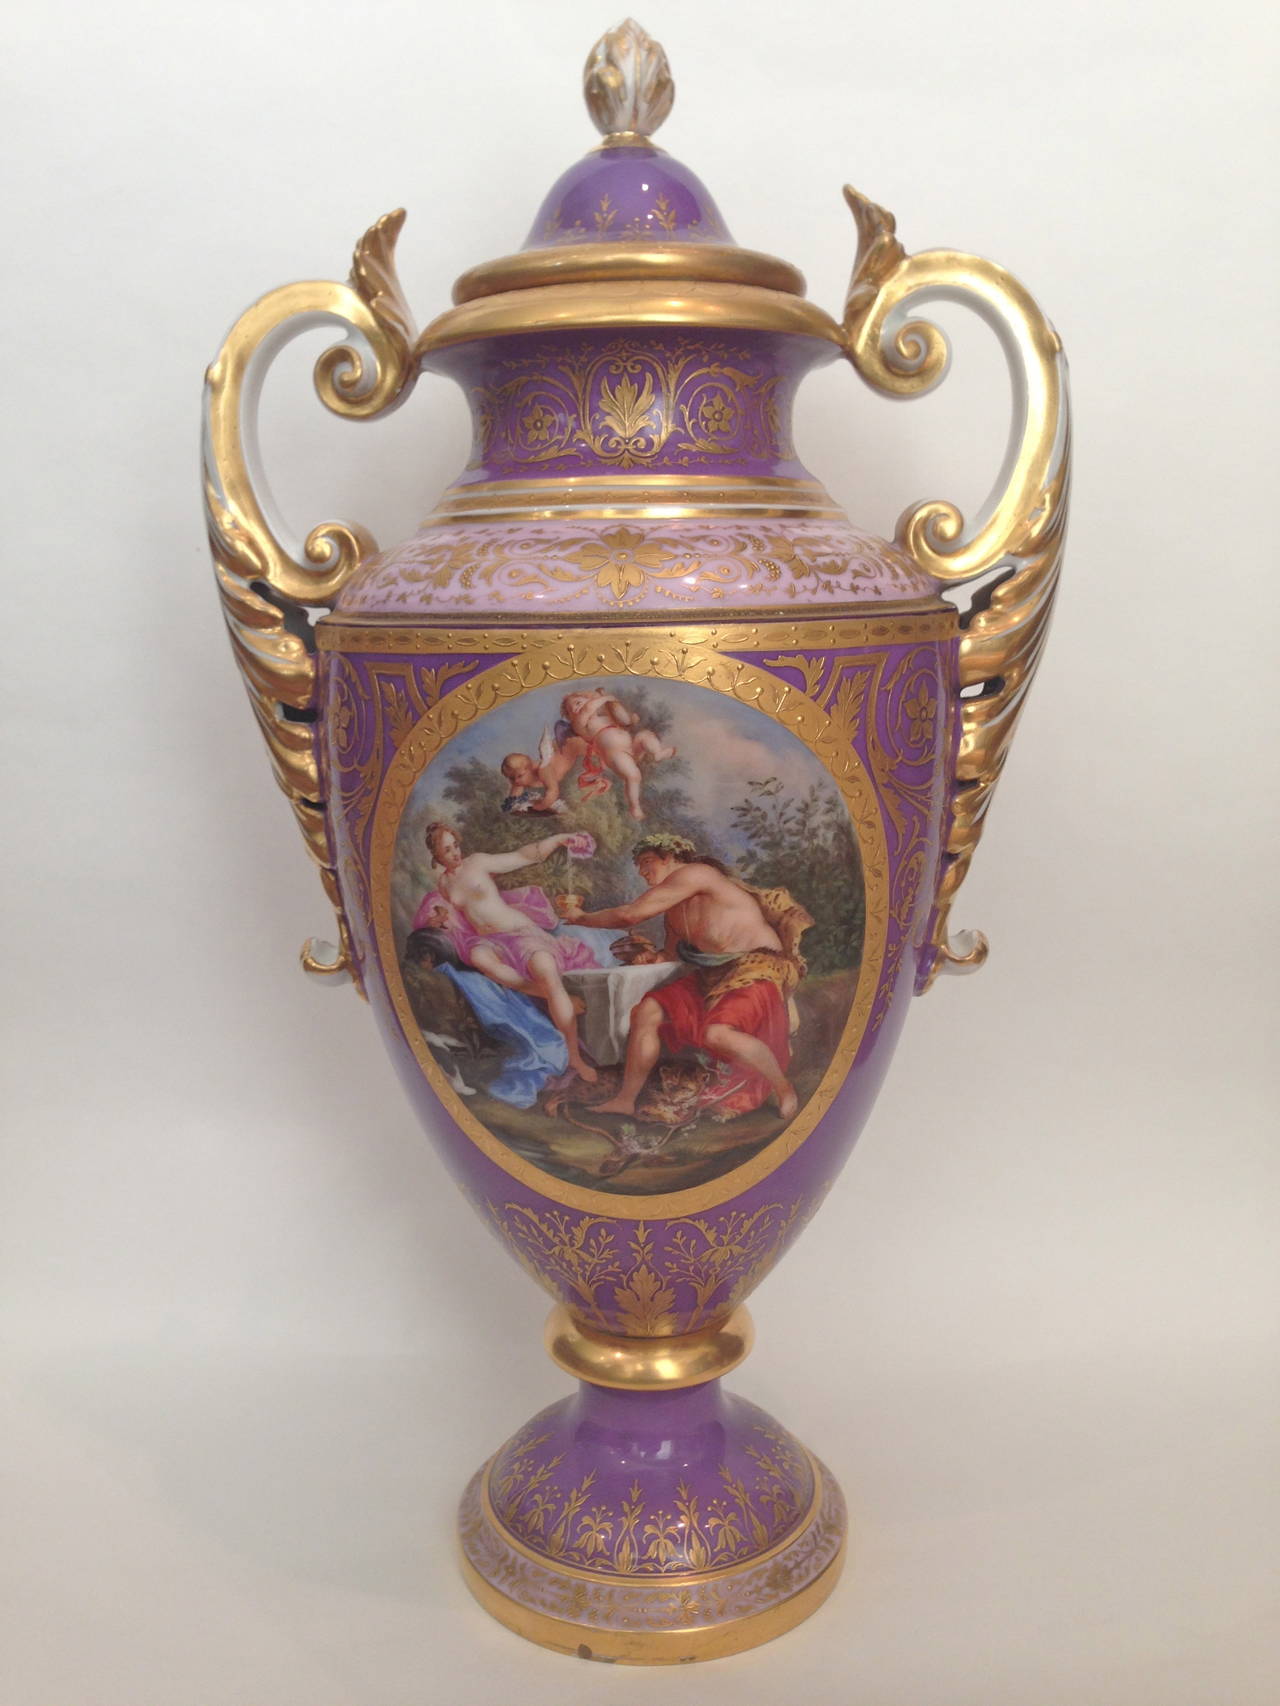 Extremely Rare Vienna Porcelain Covered Urns Fantastic Color, 19th Century In Excellent Condition For Sale In Redding, CA